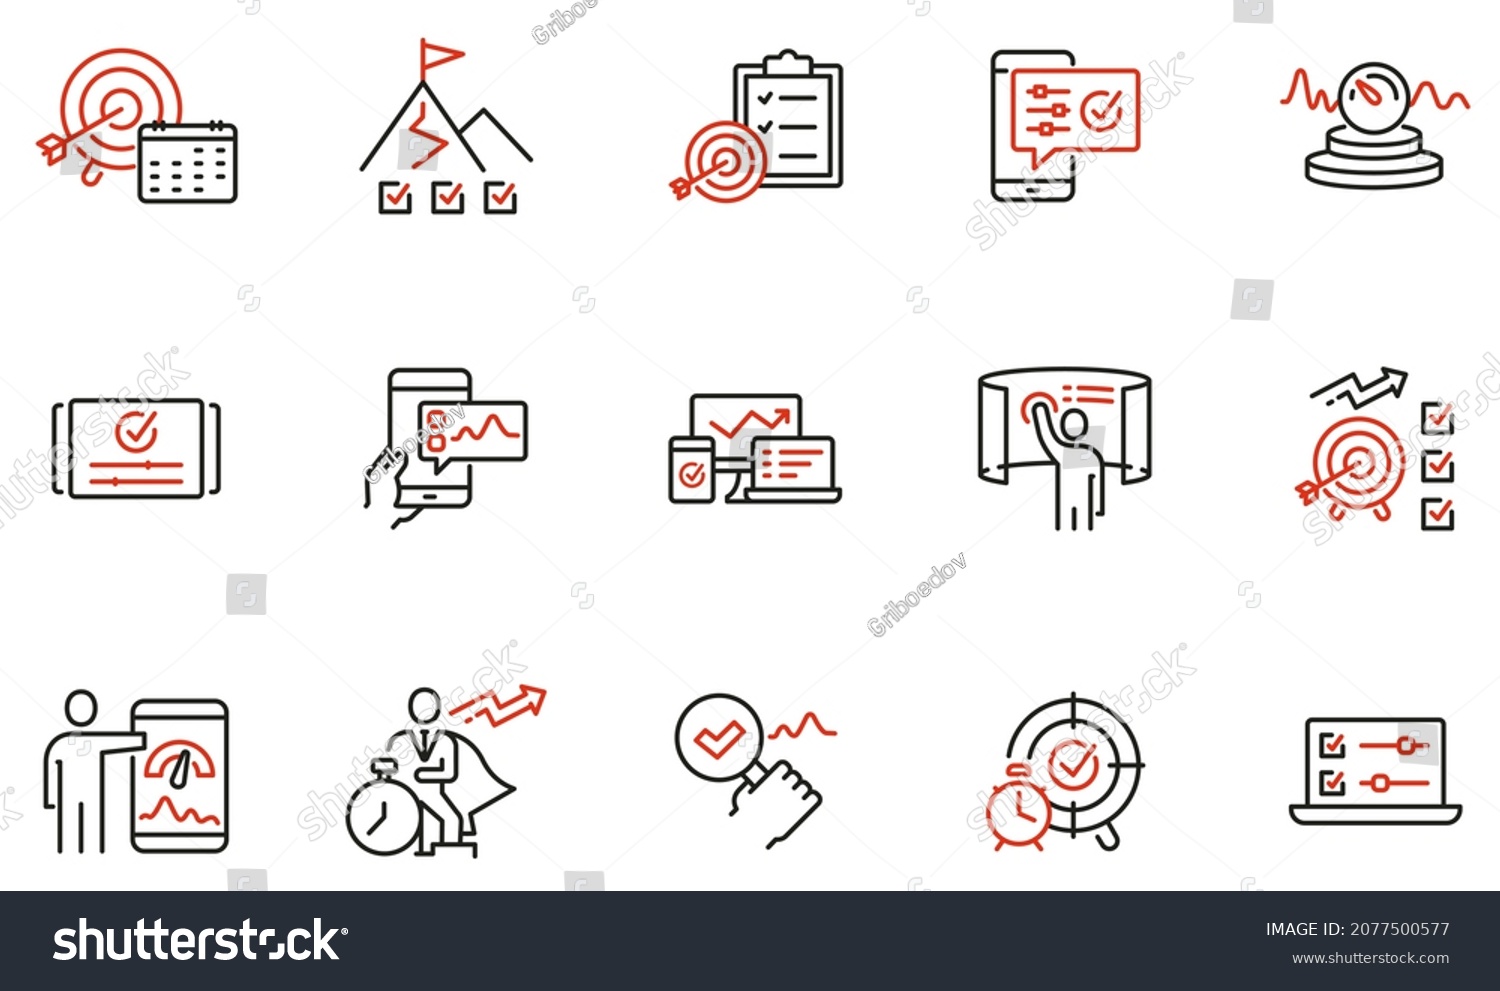 Vector set of linear icons related to productivity time, task management, dashboards of apps, work progress and performance indicators. Mono line pictograms and infographics design elements  #2077500577